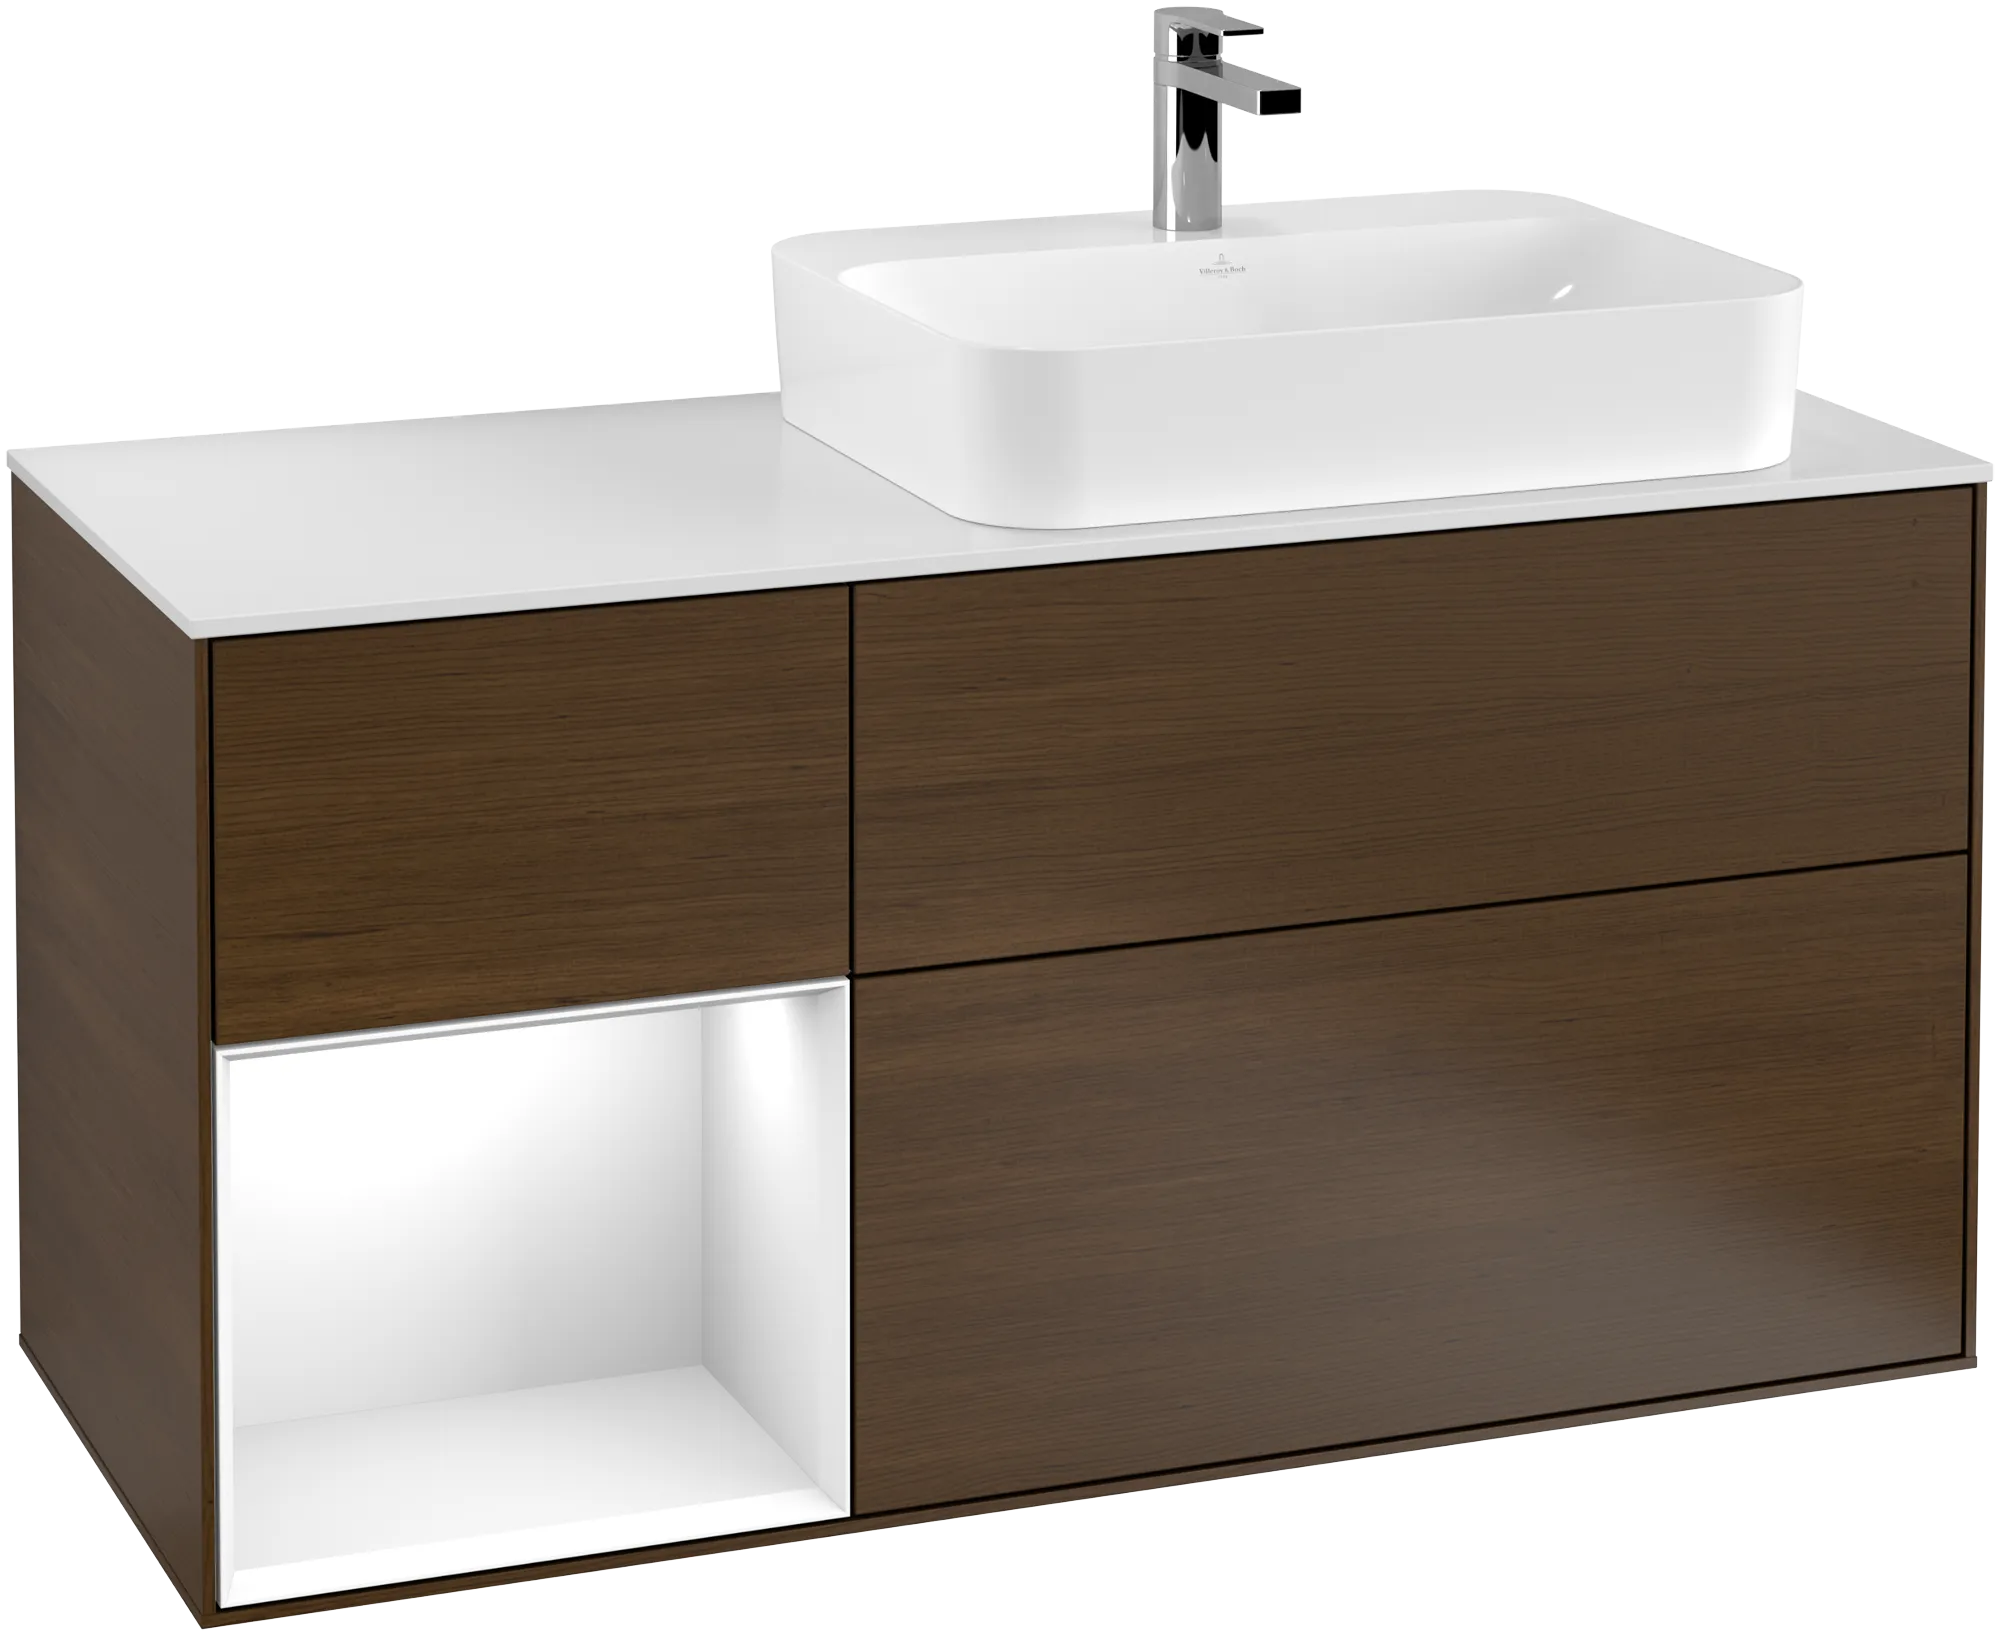 Obrázek VILLEROY BOCH Finion Vanity unit, with lighting, 3 pull-out compartments, 1200 x 603 x 501 mm, Walnut Veneer / Glossy White Lacquer / Glass White Matt #G391GFGN